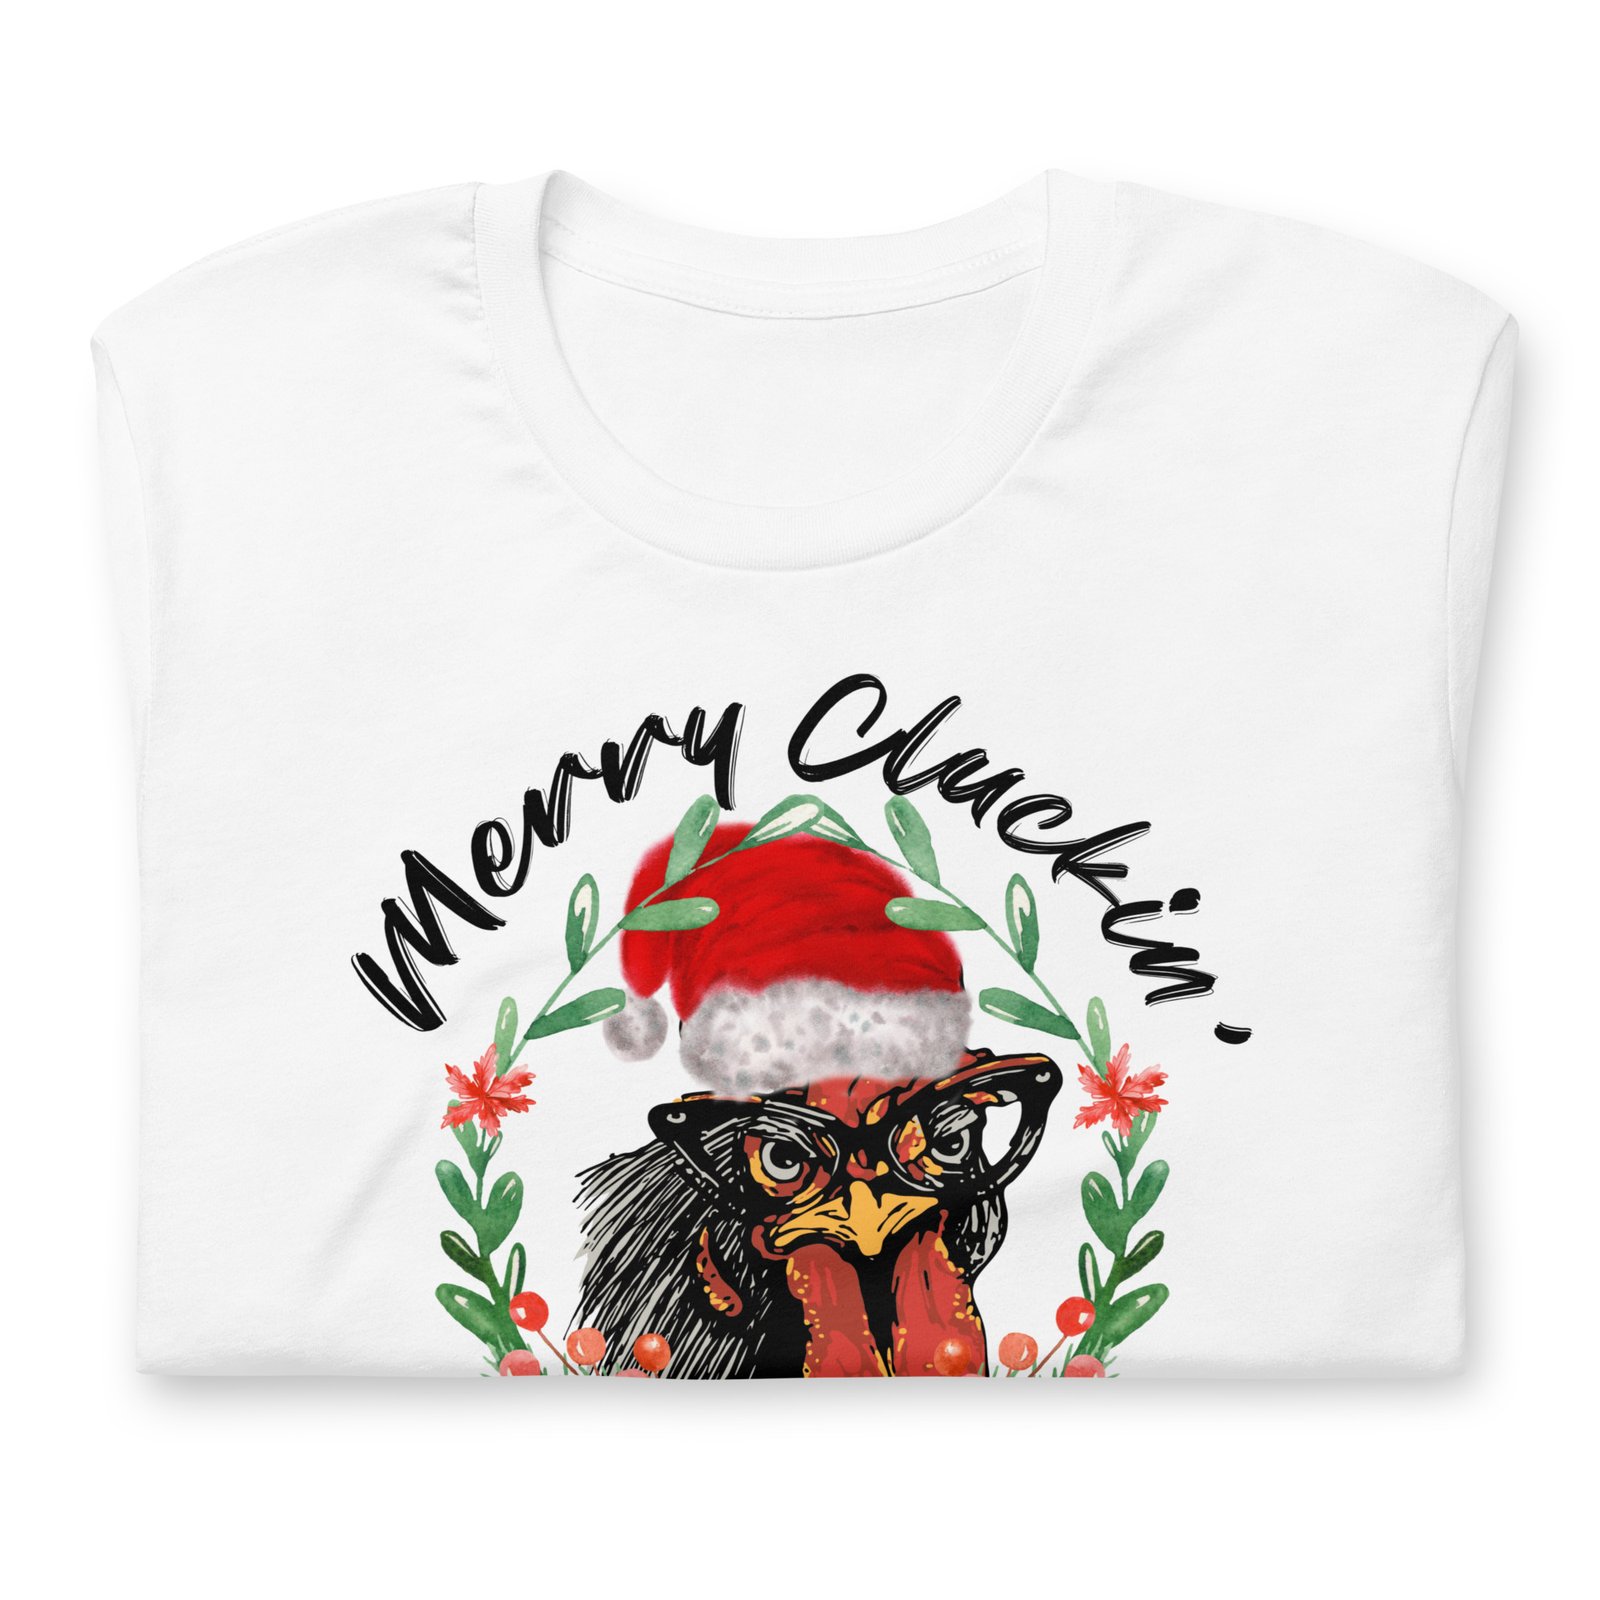 Merry Clucking Christmas' Funny Chicken Christmas T-Shirt